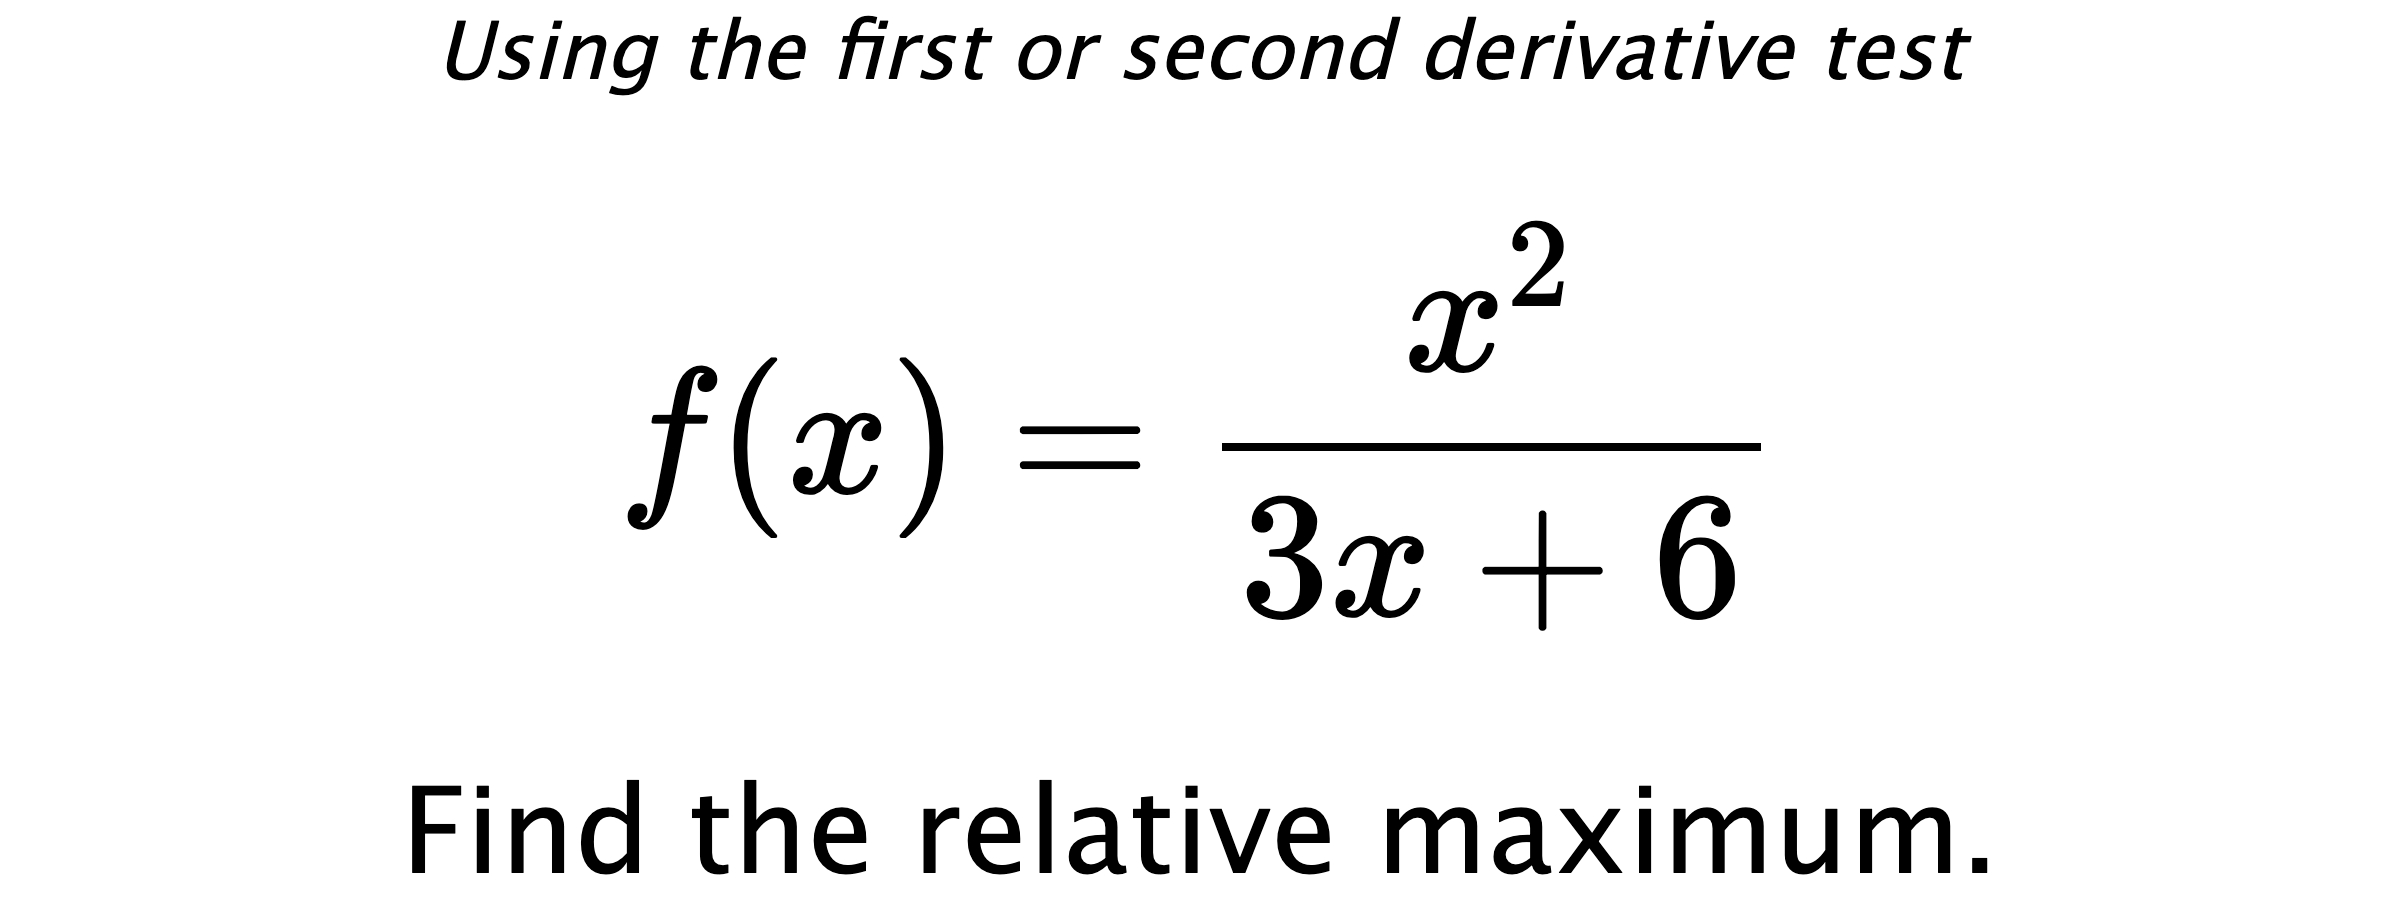 Using the first or second derivative test $$ f(x)=\frac{x^2}{3x+6} $$ Find the relative maximum.